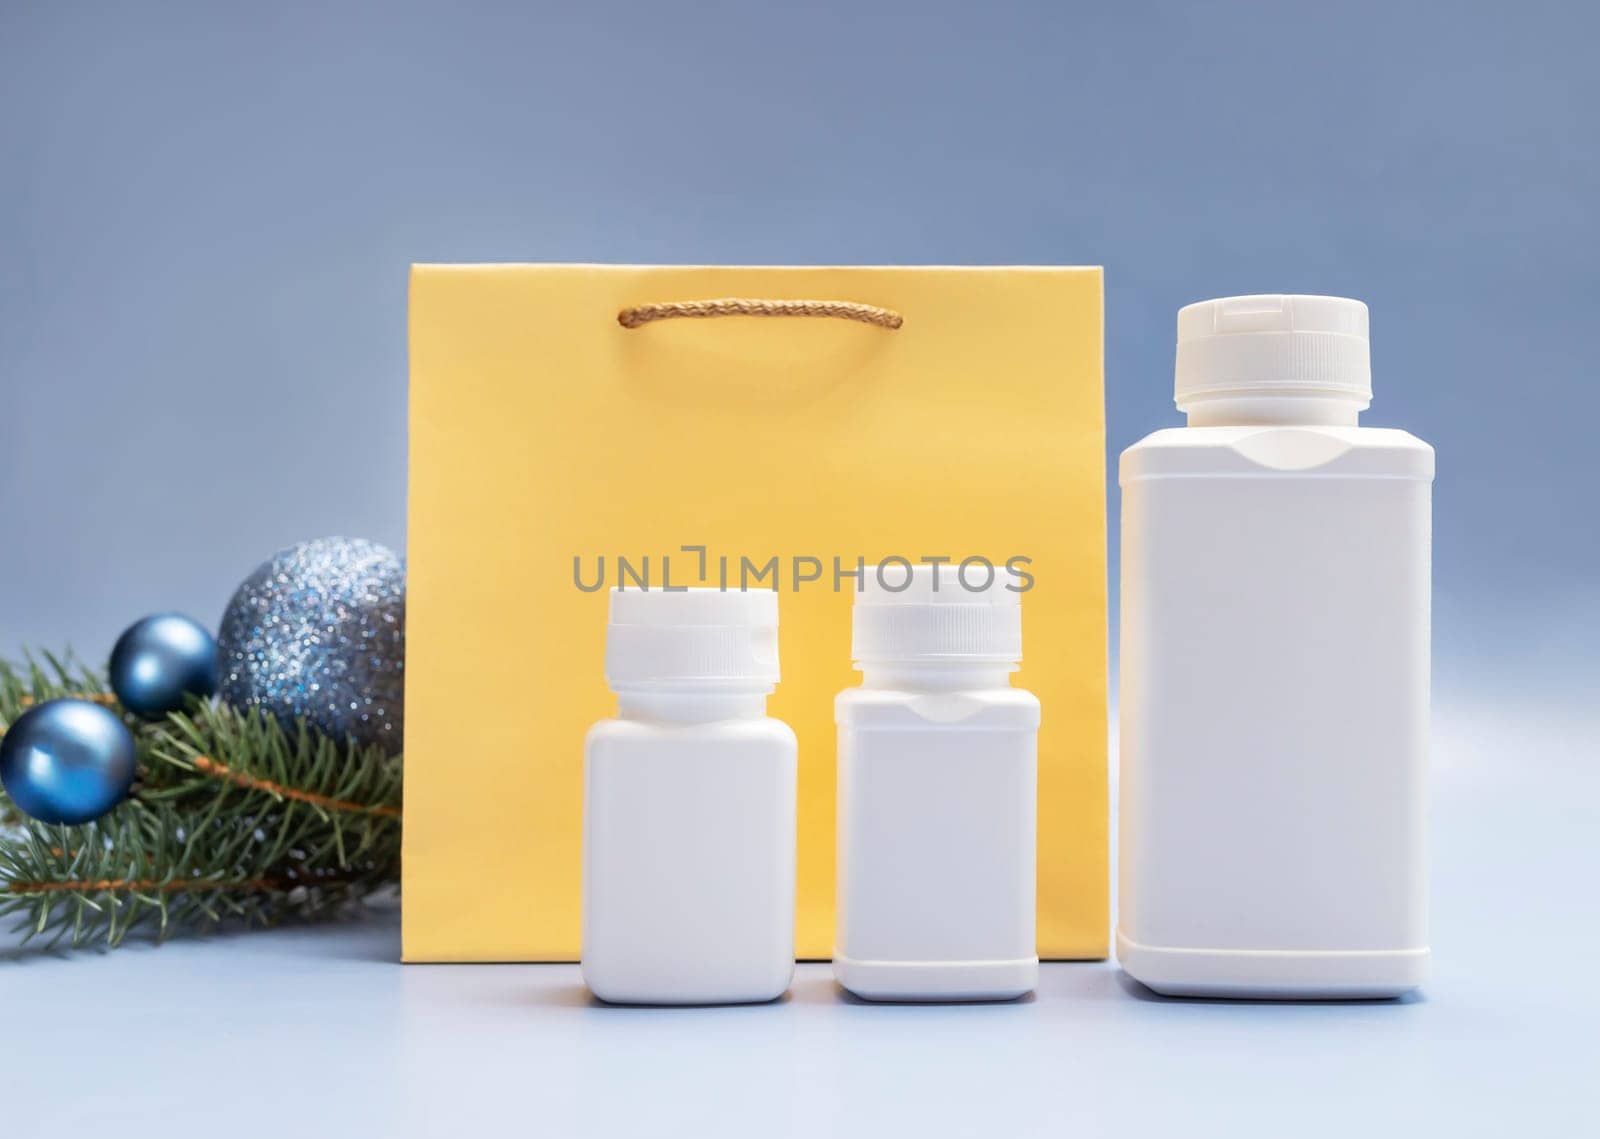 Christmas pharmacy white bottles of pills, golden paper package, Christmas tree, sparkling toy balls on blue background. Winter holidays, medical concept. Horizontal plane